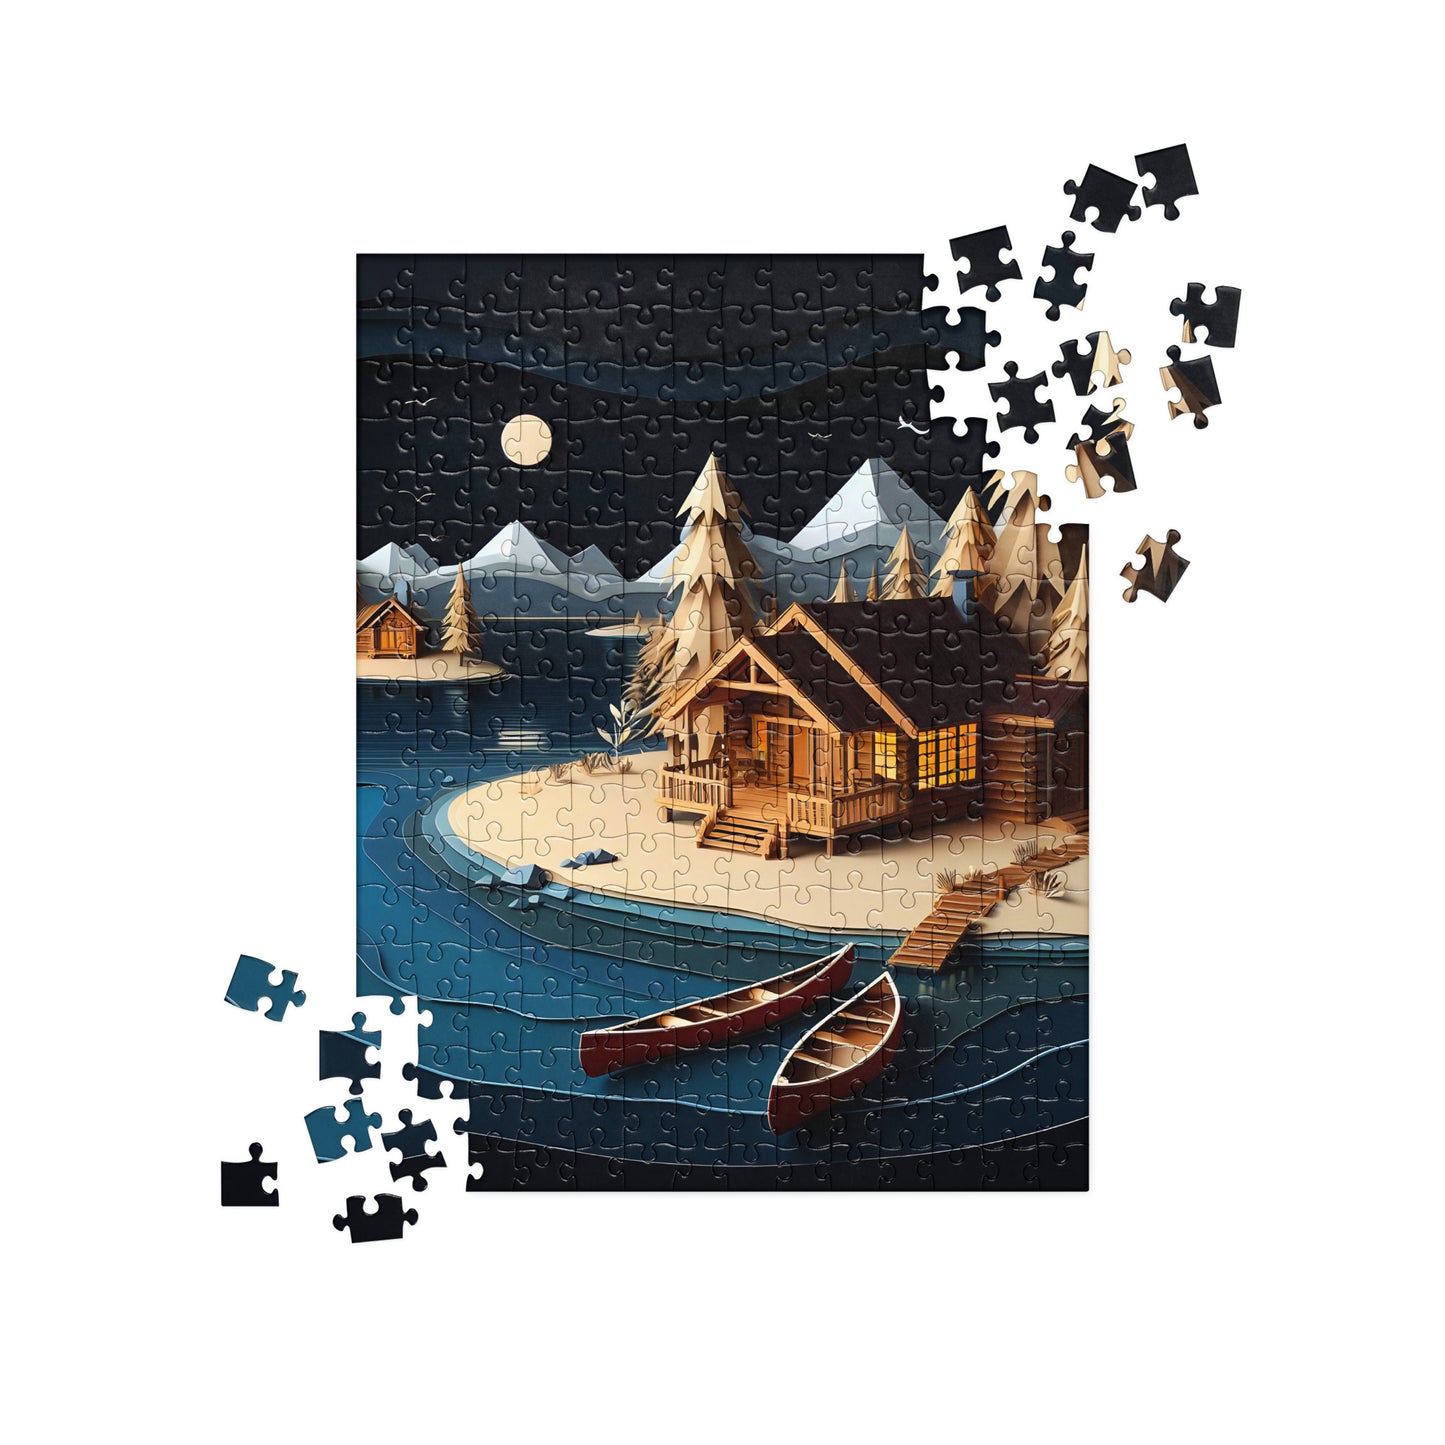 3D Wooden Cabin - Jigsaw Puzzle #8